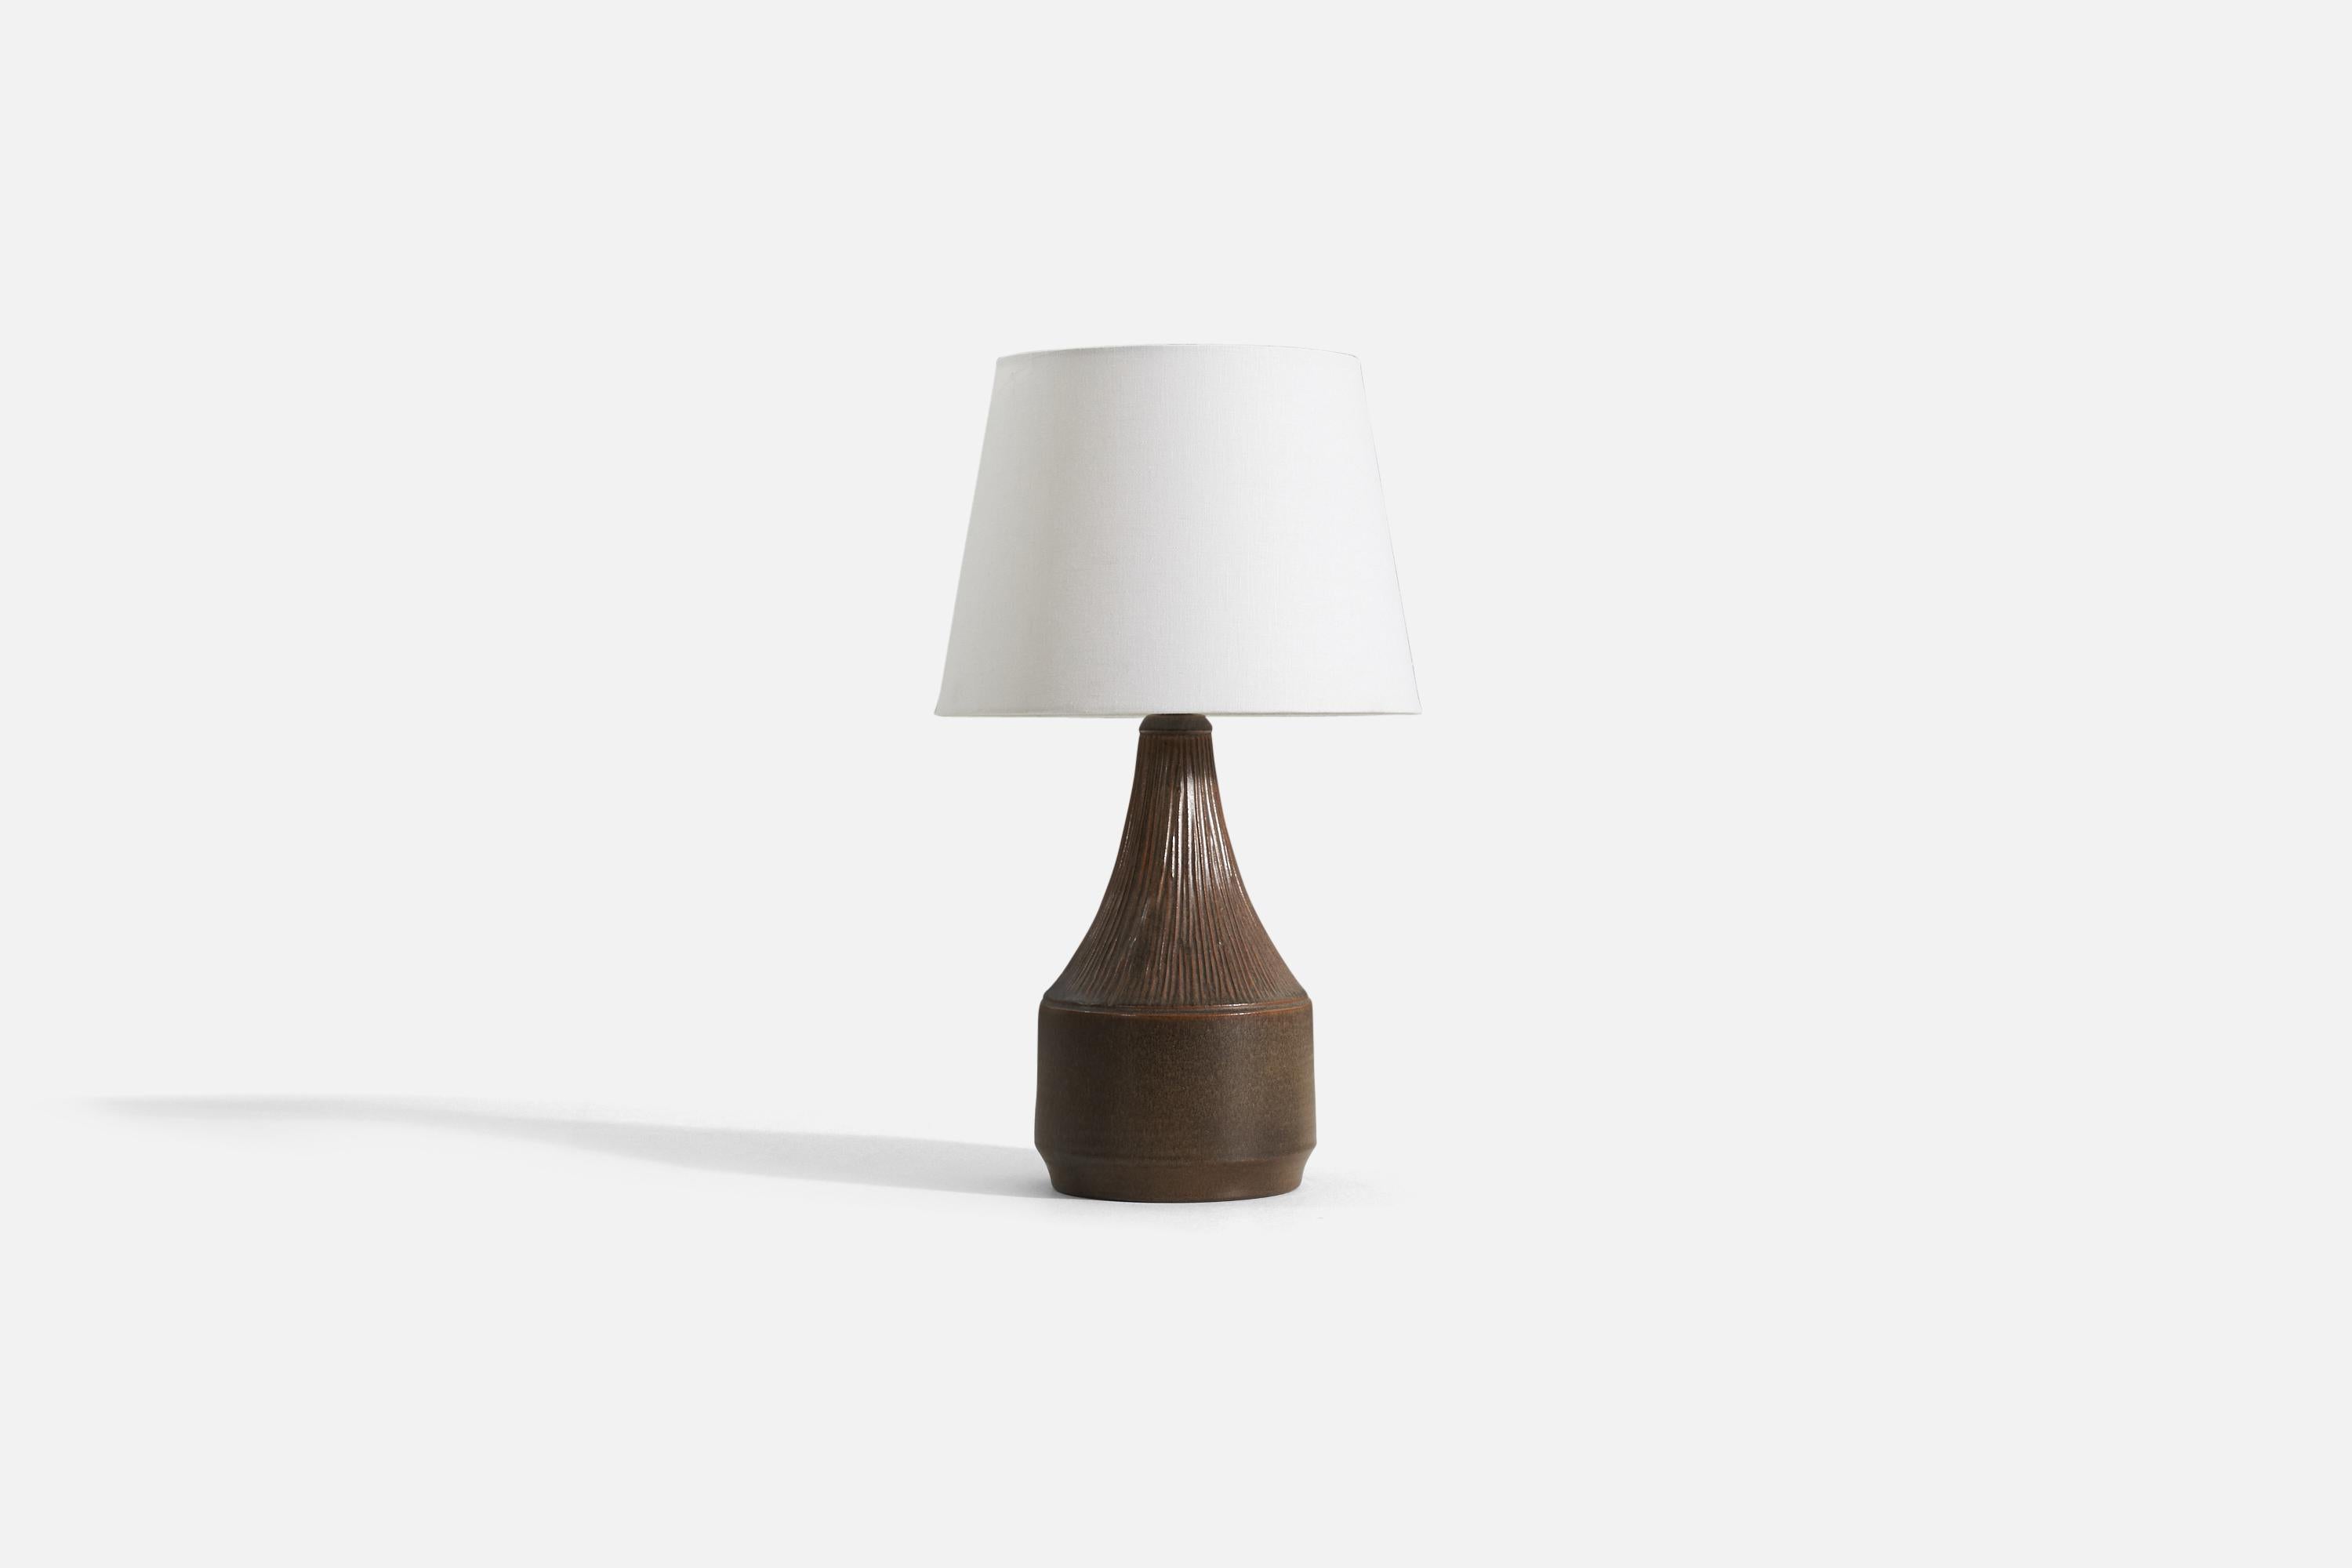 A brown stoneware table lamp designed by Henry Brandi, and produced by his own firm, Brandi Vejbystrand, Sweden, 1960s. Marked and labeled. 

Sold without shade. Measurements listed are of lamp itself. 

For reference. additional dimensions